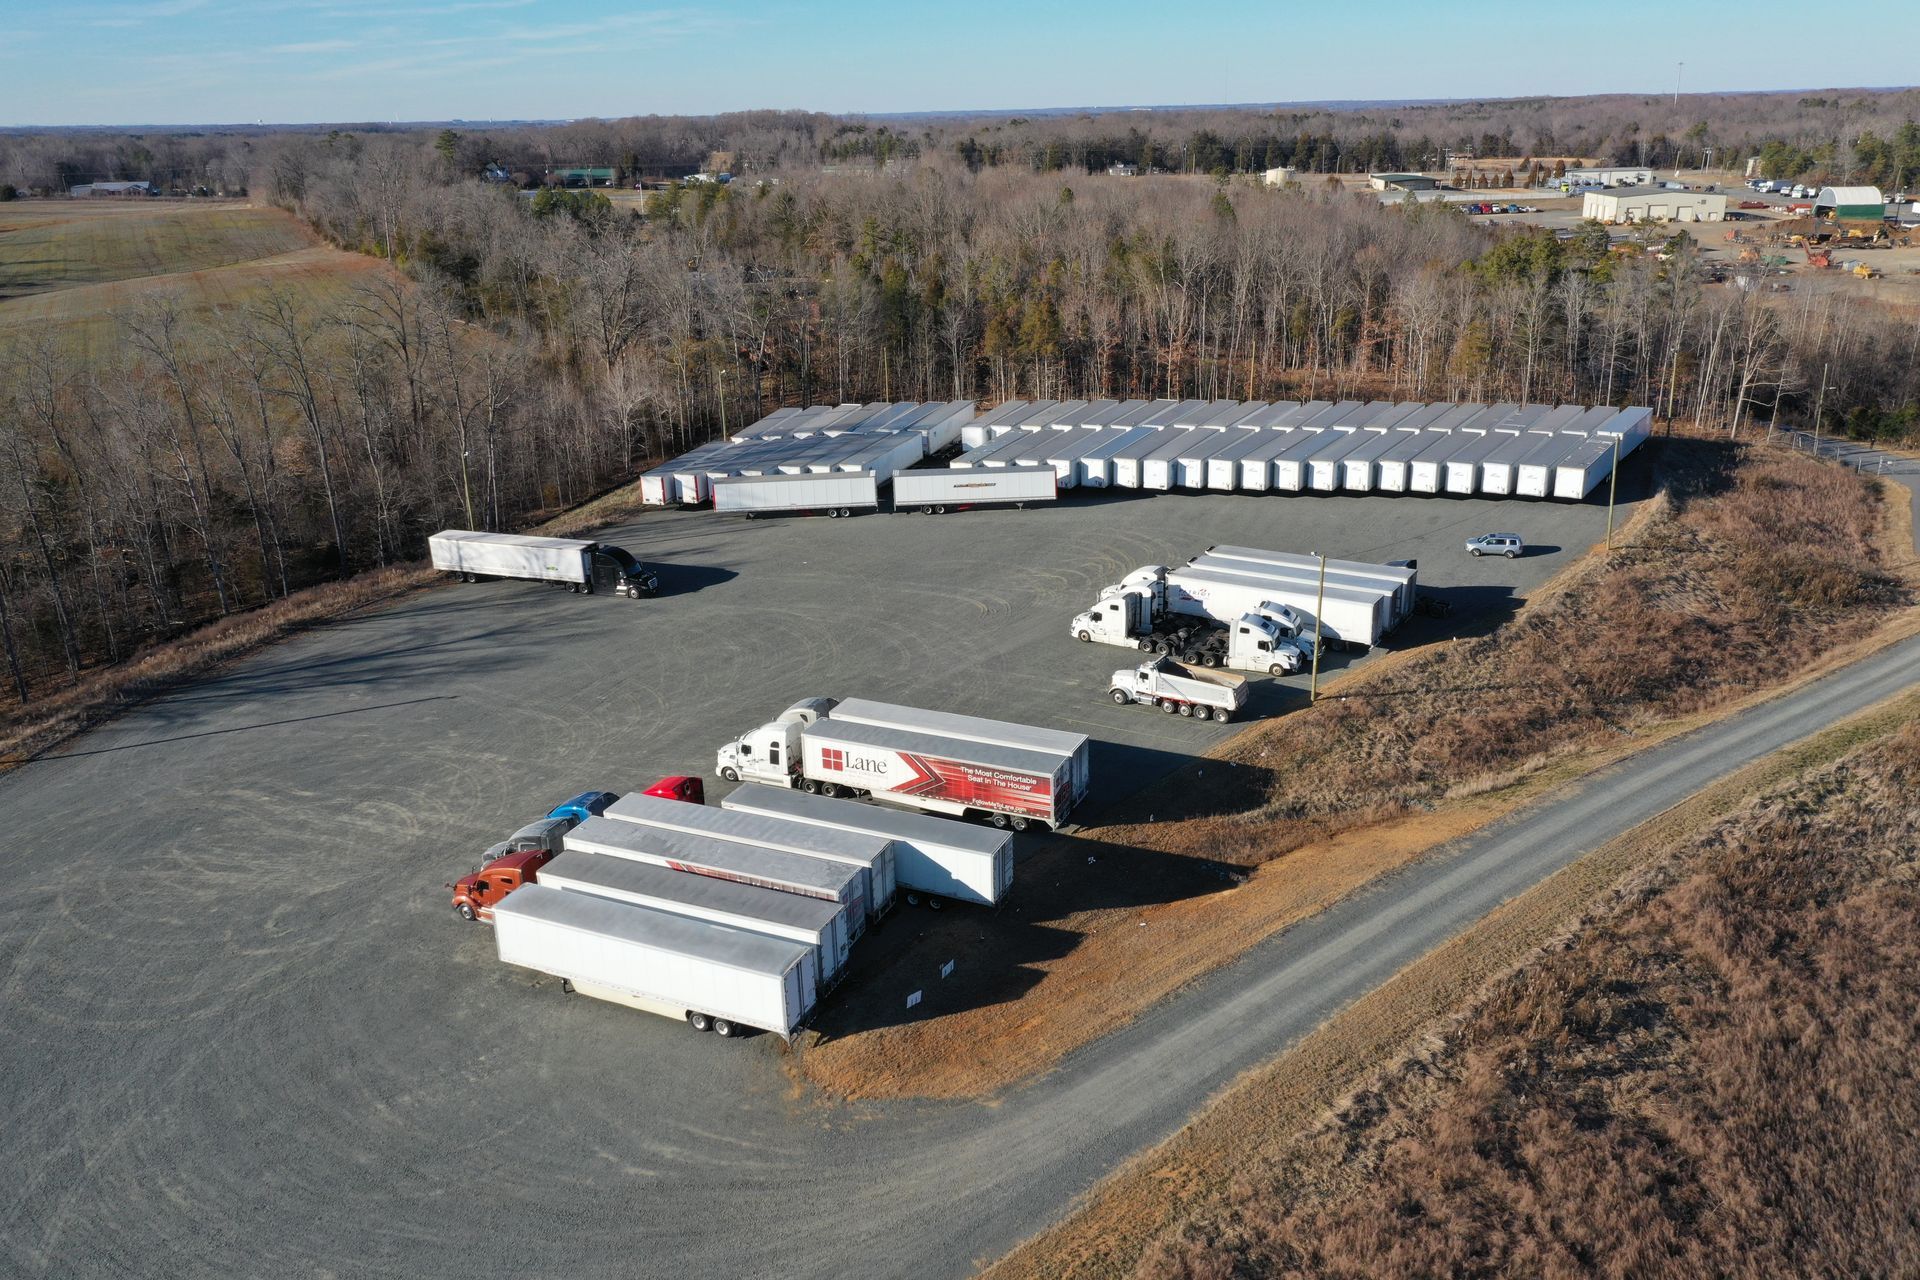 An aerial view of a warehouse with trucks parked in a lot.